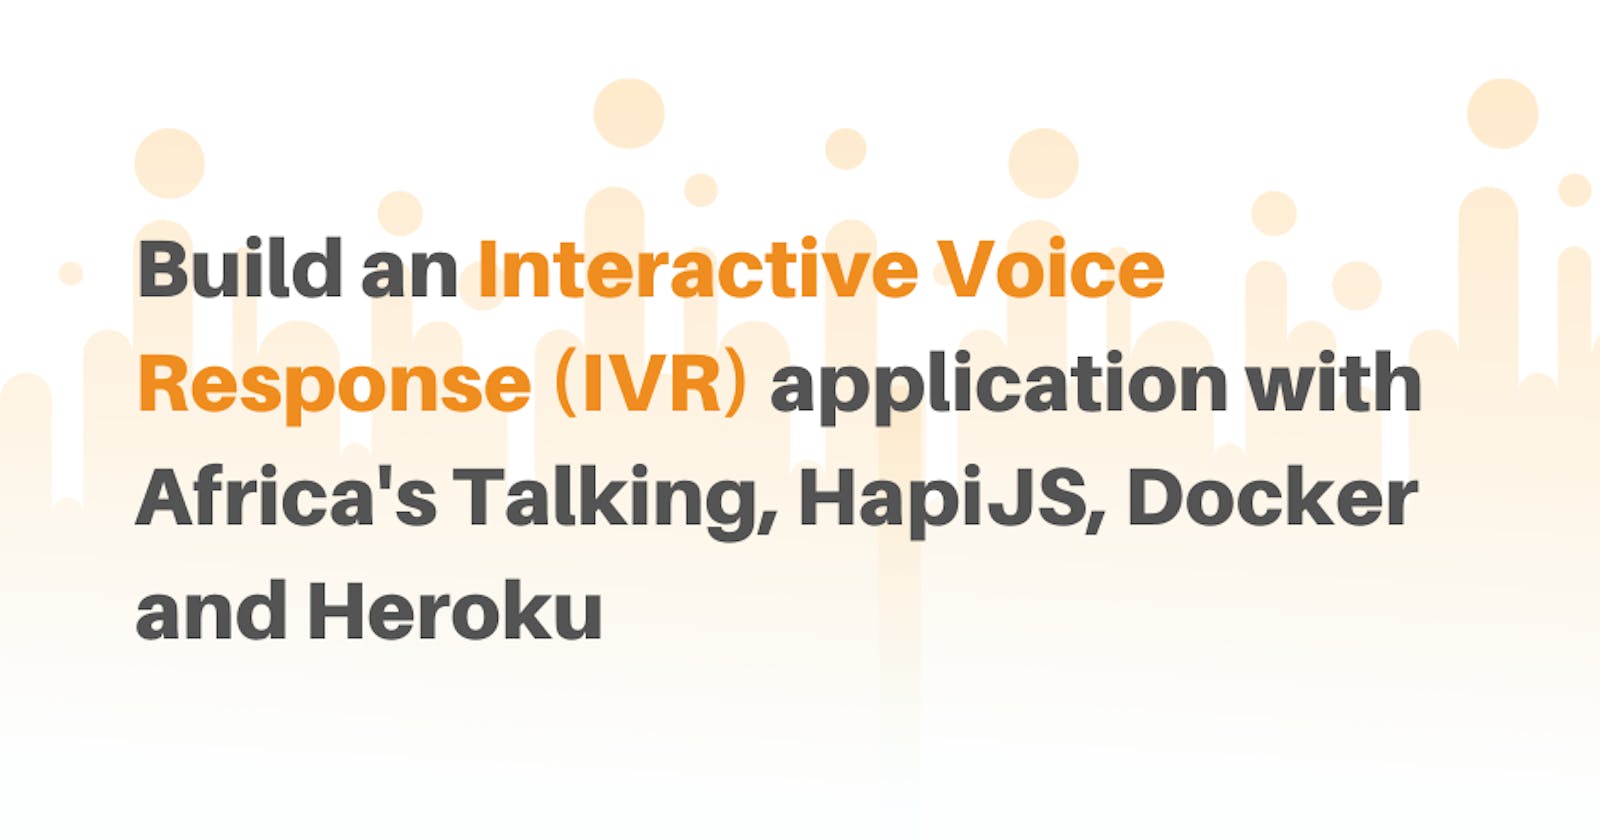 Build a Interactive Voice Response (IVR) application with Africa's Talking, HapiJS, Docker and Heroku